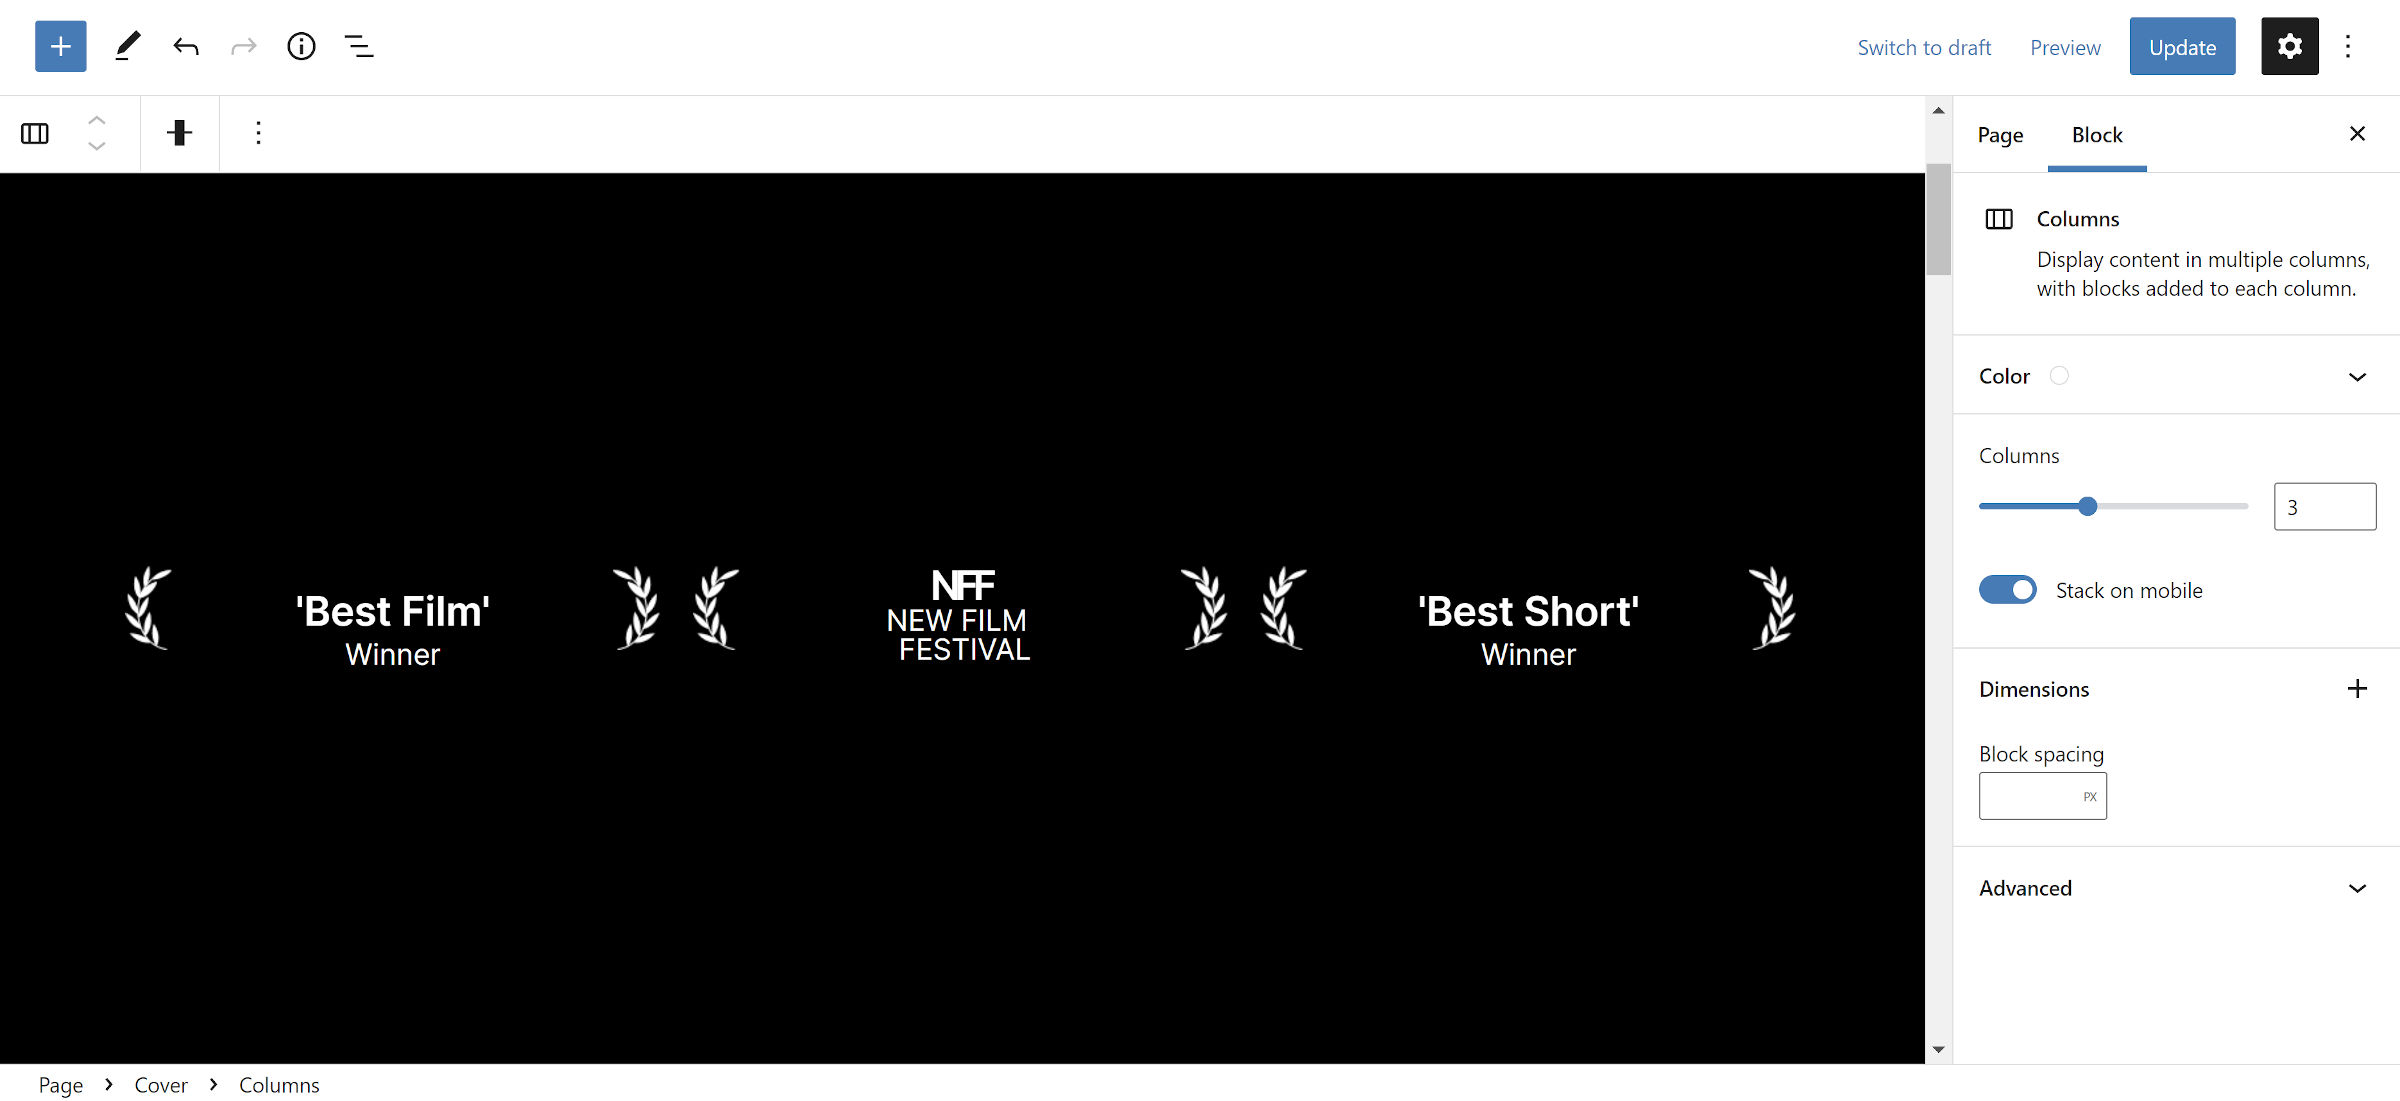 Three-column grid for showcasing film awards with rounded leaves around each.